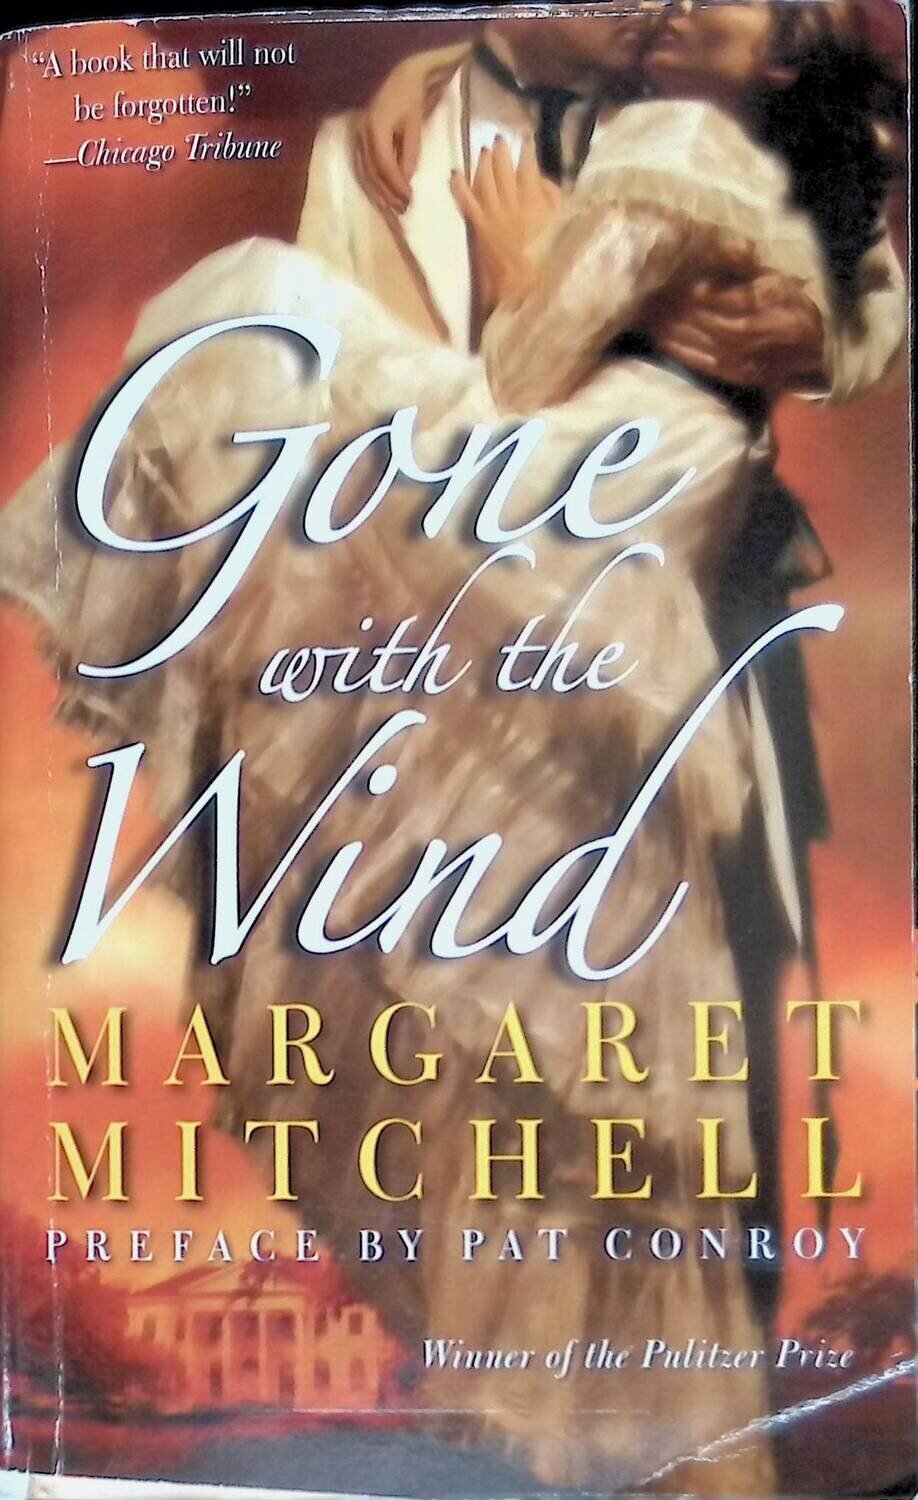 Gone with the wind; Margaret Mitchell